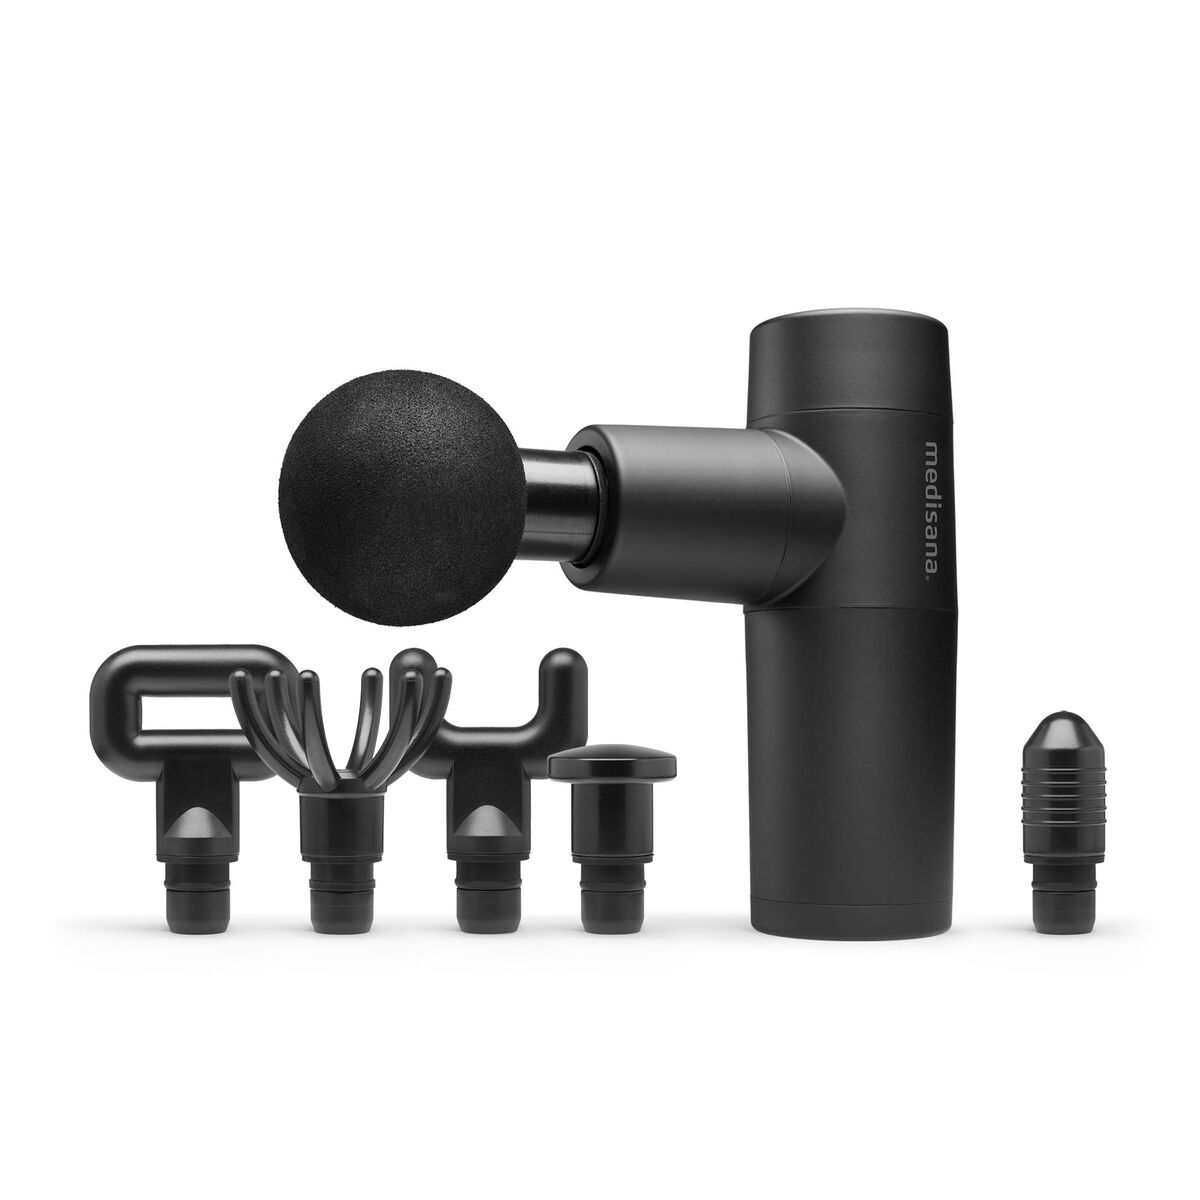 Massage Gun for Relaxation and Muscle Recovery Medisana MG 150 Black - Calm Beauty IE